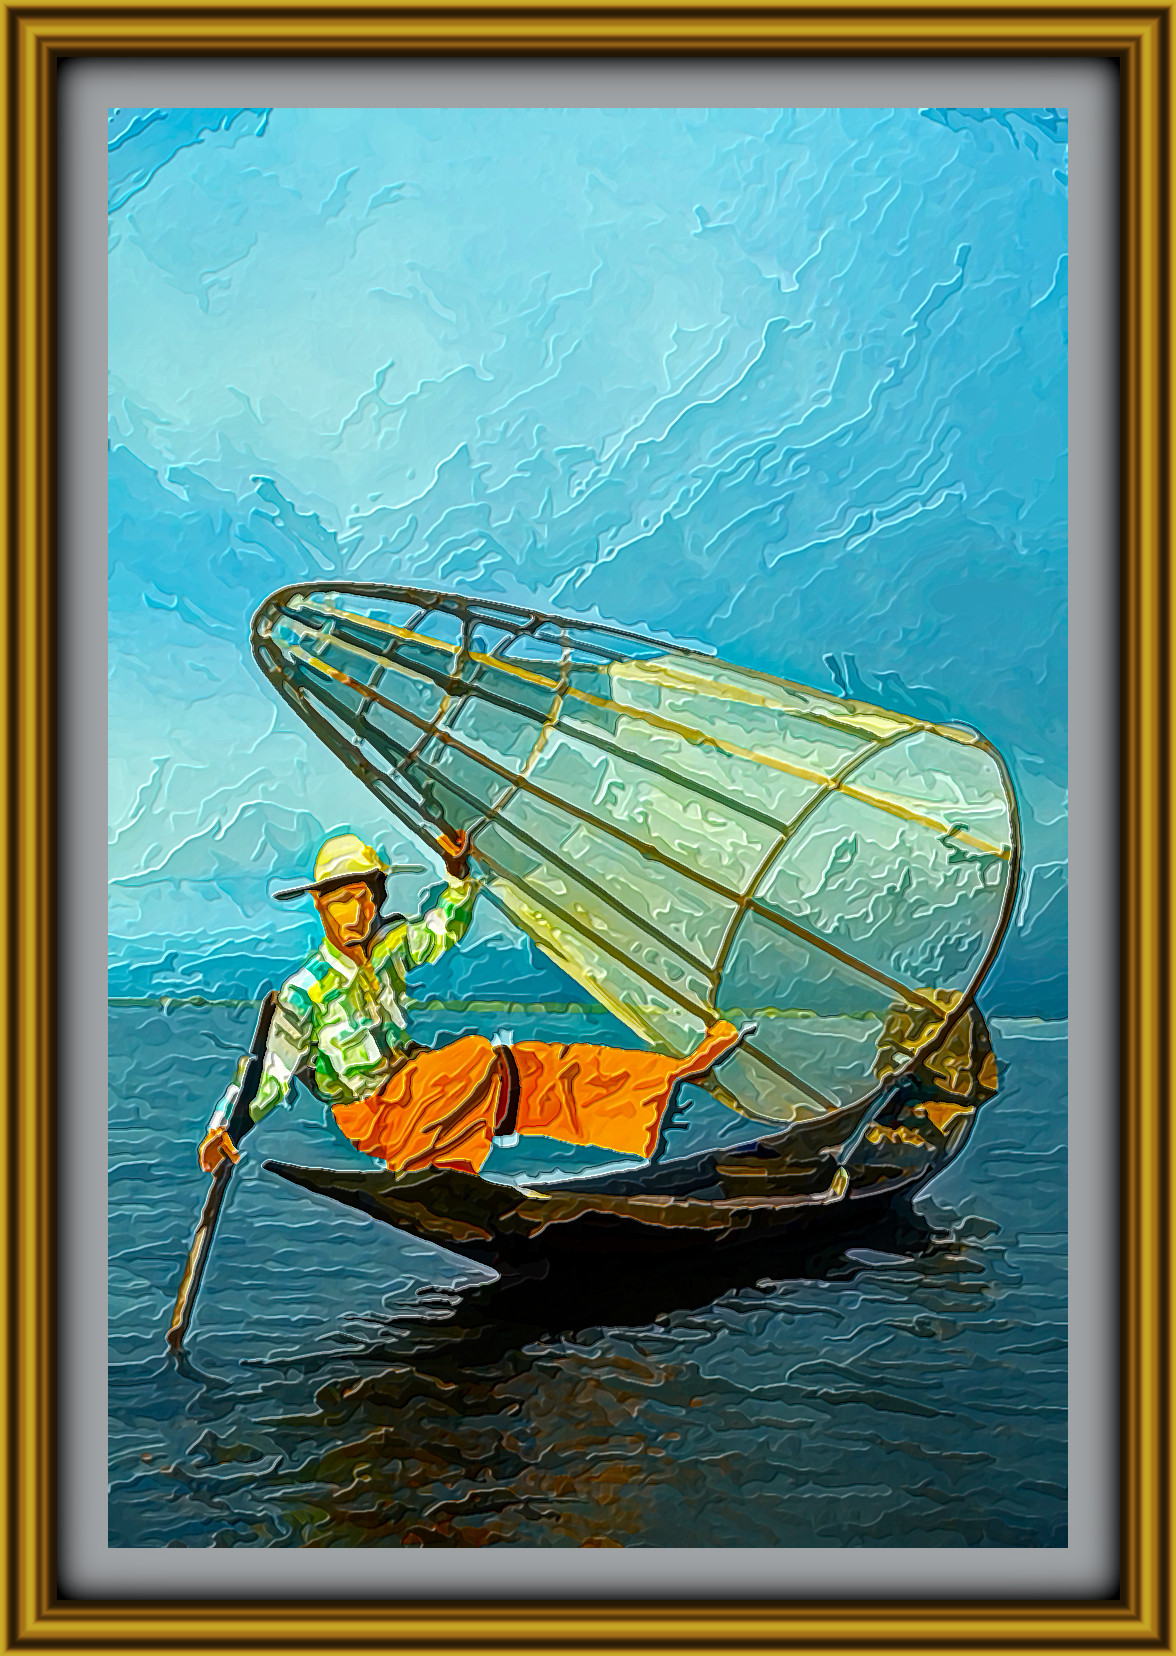 2024-02-15 09-50-38 Inle_Lake_Fisherman_Portrait_Myanmar_Colby_Brown_3 with JVID Embossed Graphic Effect, parms=1, 127.0, 6.0, 8.0, 7.5, 9.75, 1.5, 0.0, 0.jpeg